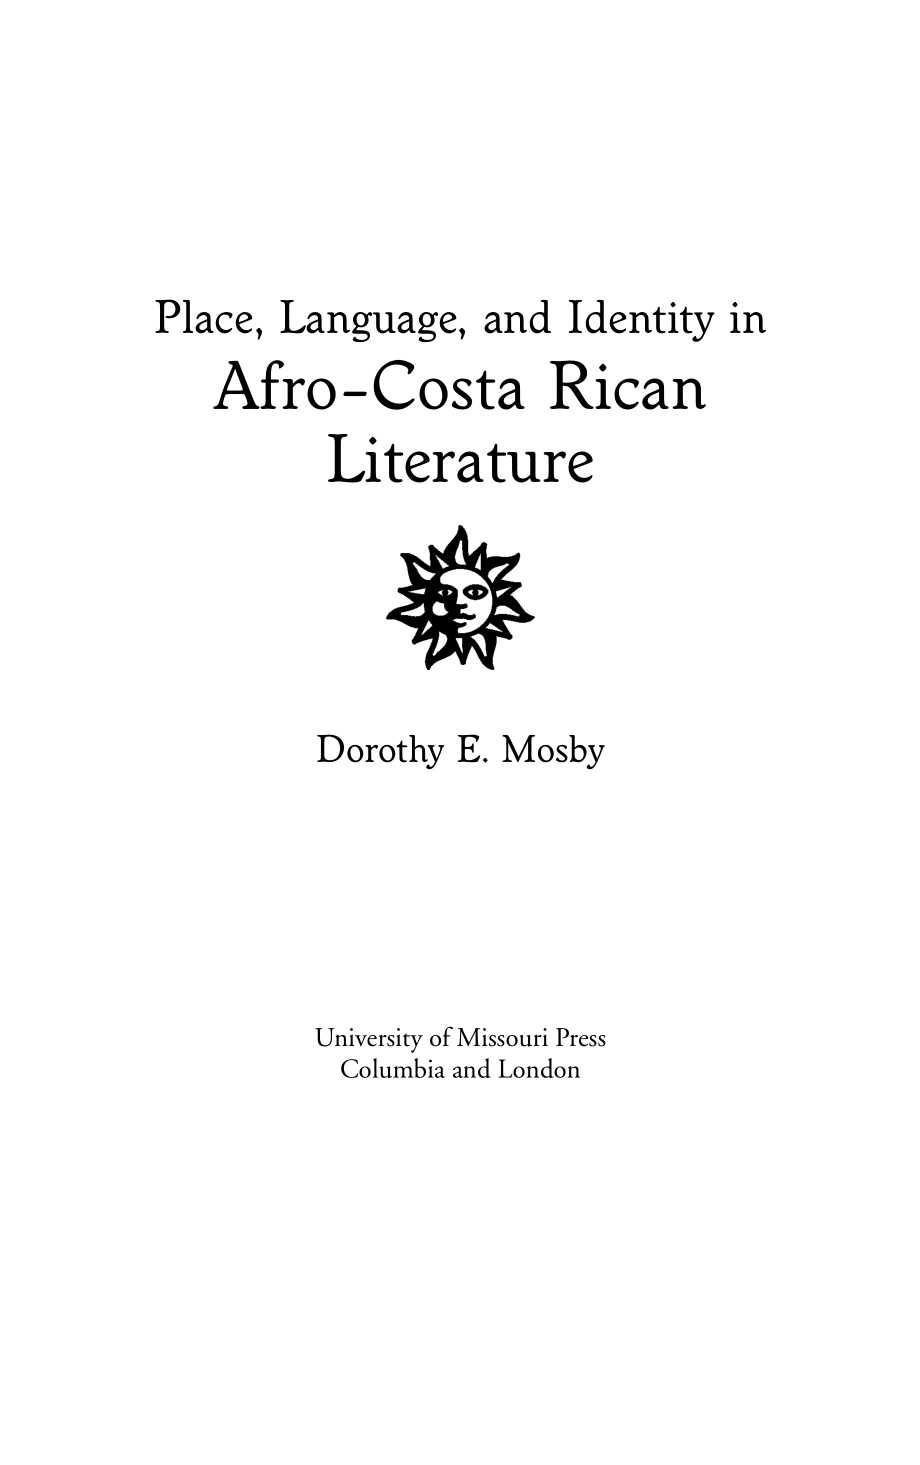 Place, Language and Identity in Afro-Costa Rican Literature 2003_第4页